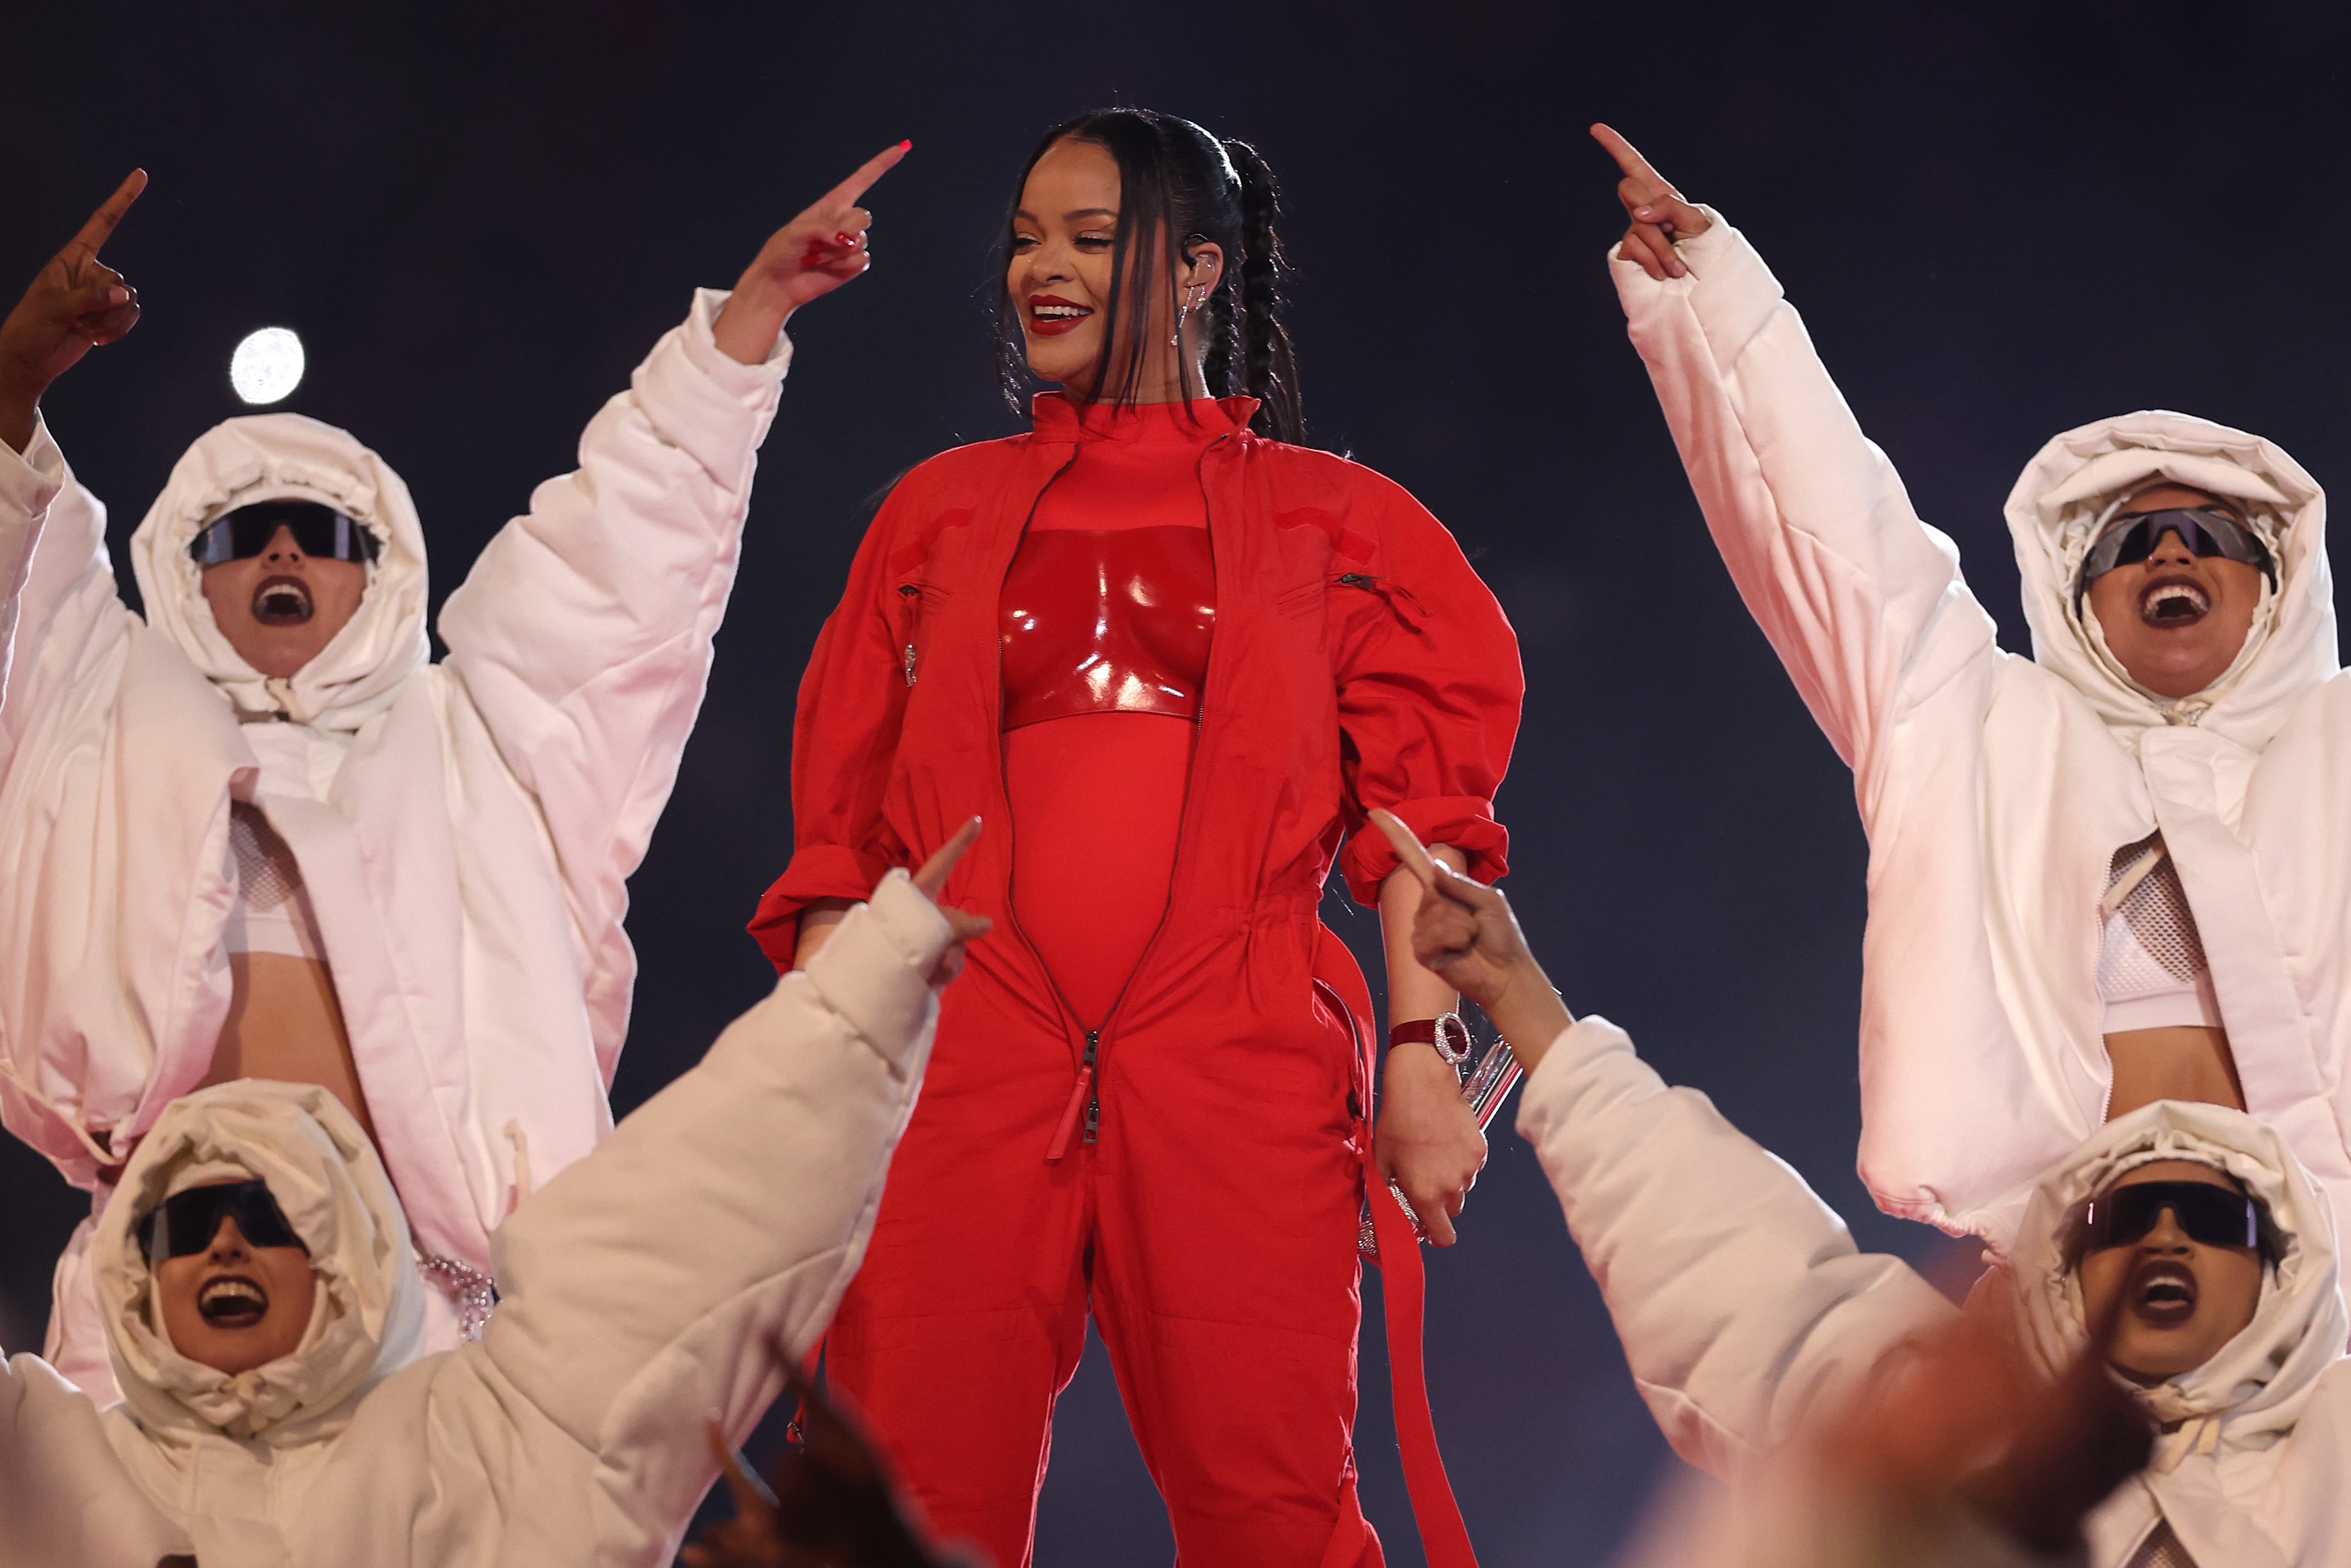 Rihanna Just Launched a Super Bowl-Themed Makeup and Skincare Kit